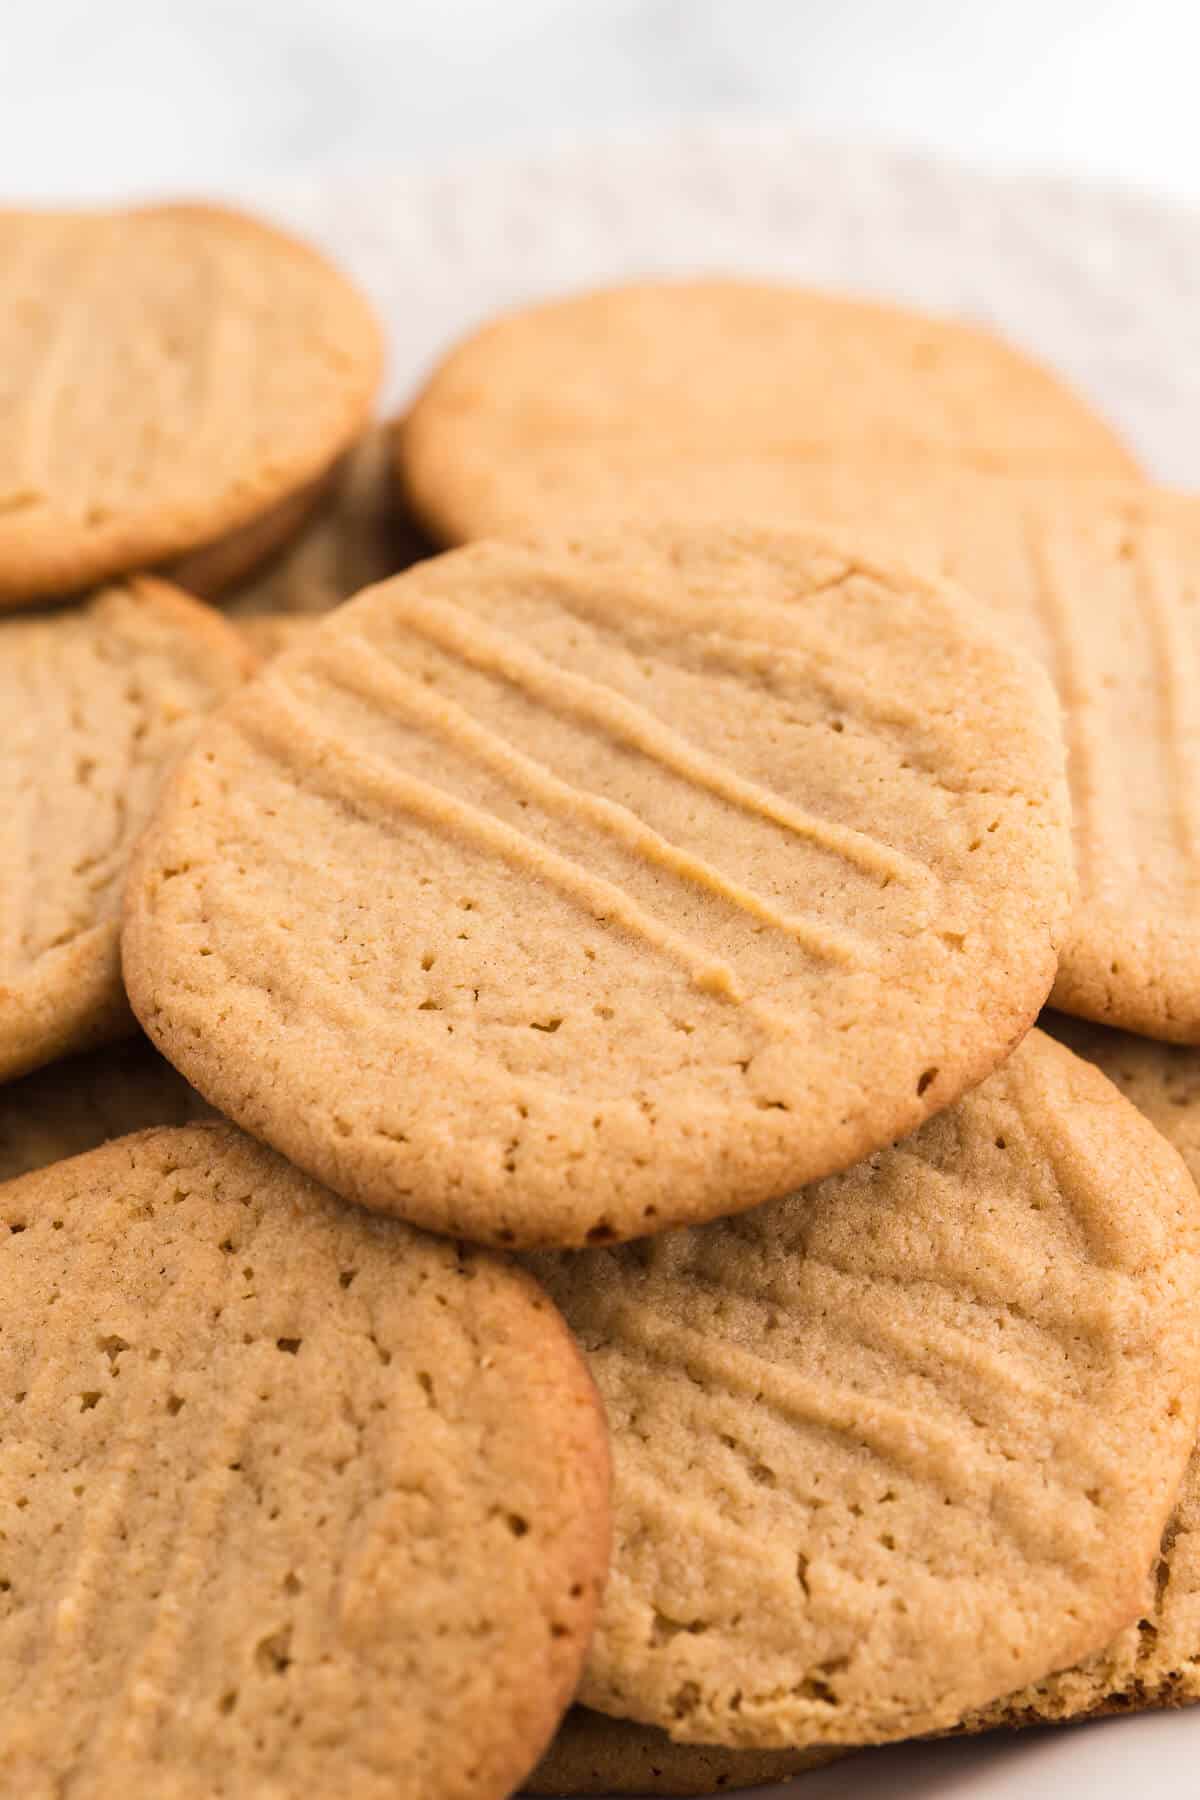 Peanut Butter Cookies - This classic homemade cookie recipe is quick and easy to make. Each bite is soft, chewy and full of peanut butter flavor that everyone knows and loves.